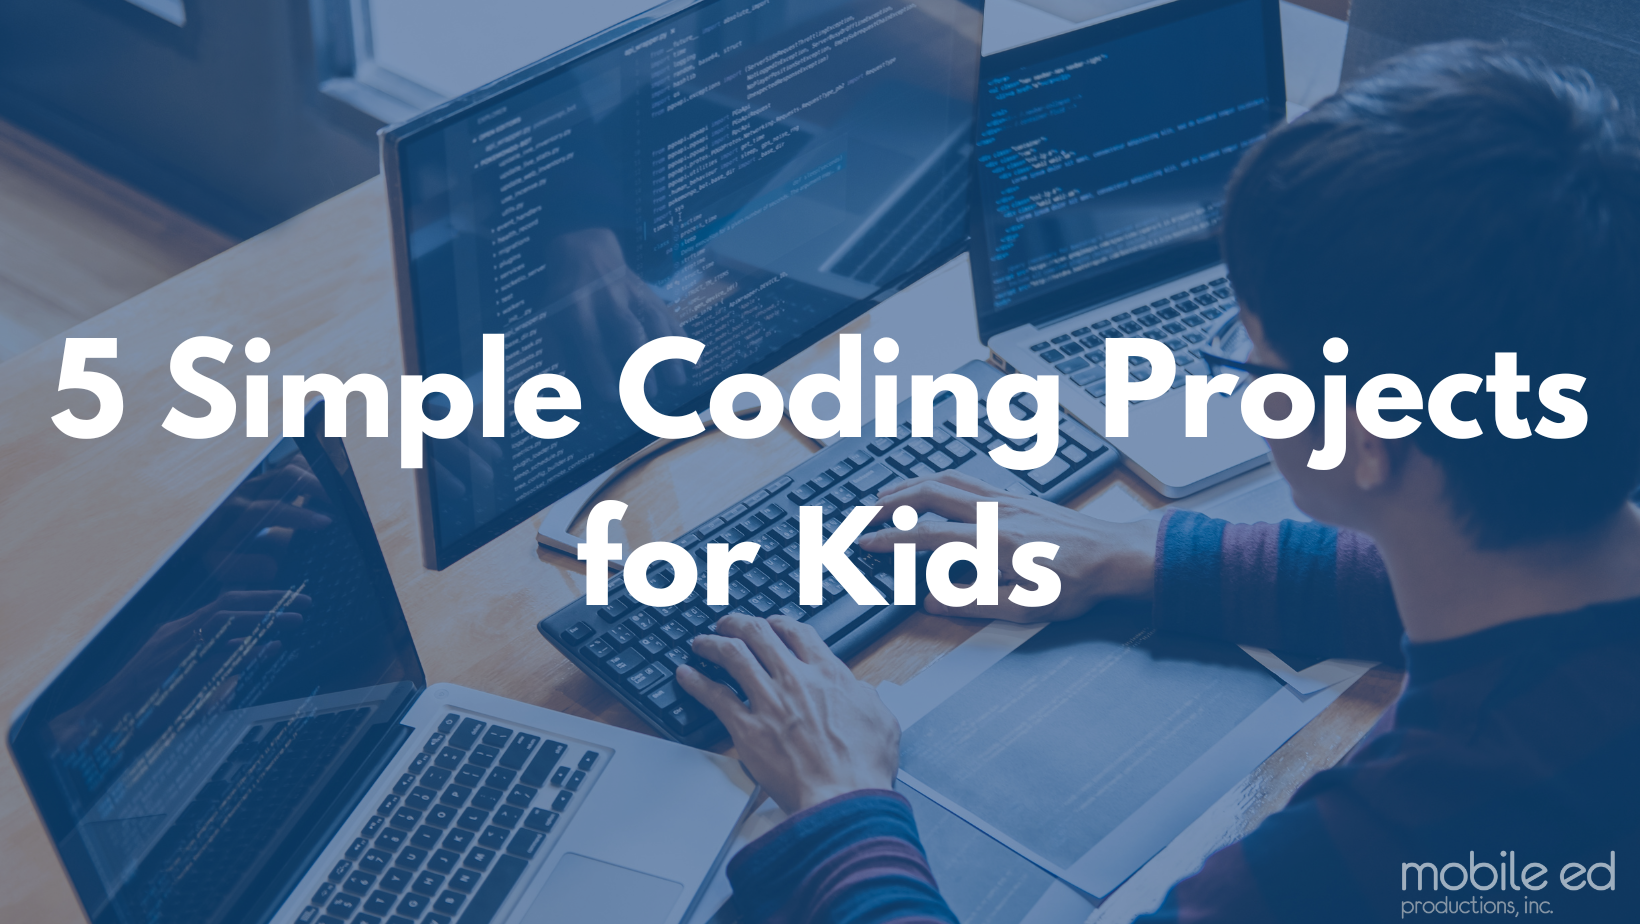 5 Simple Coding Projects for Kids